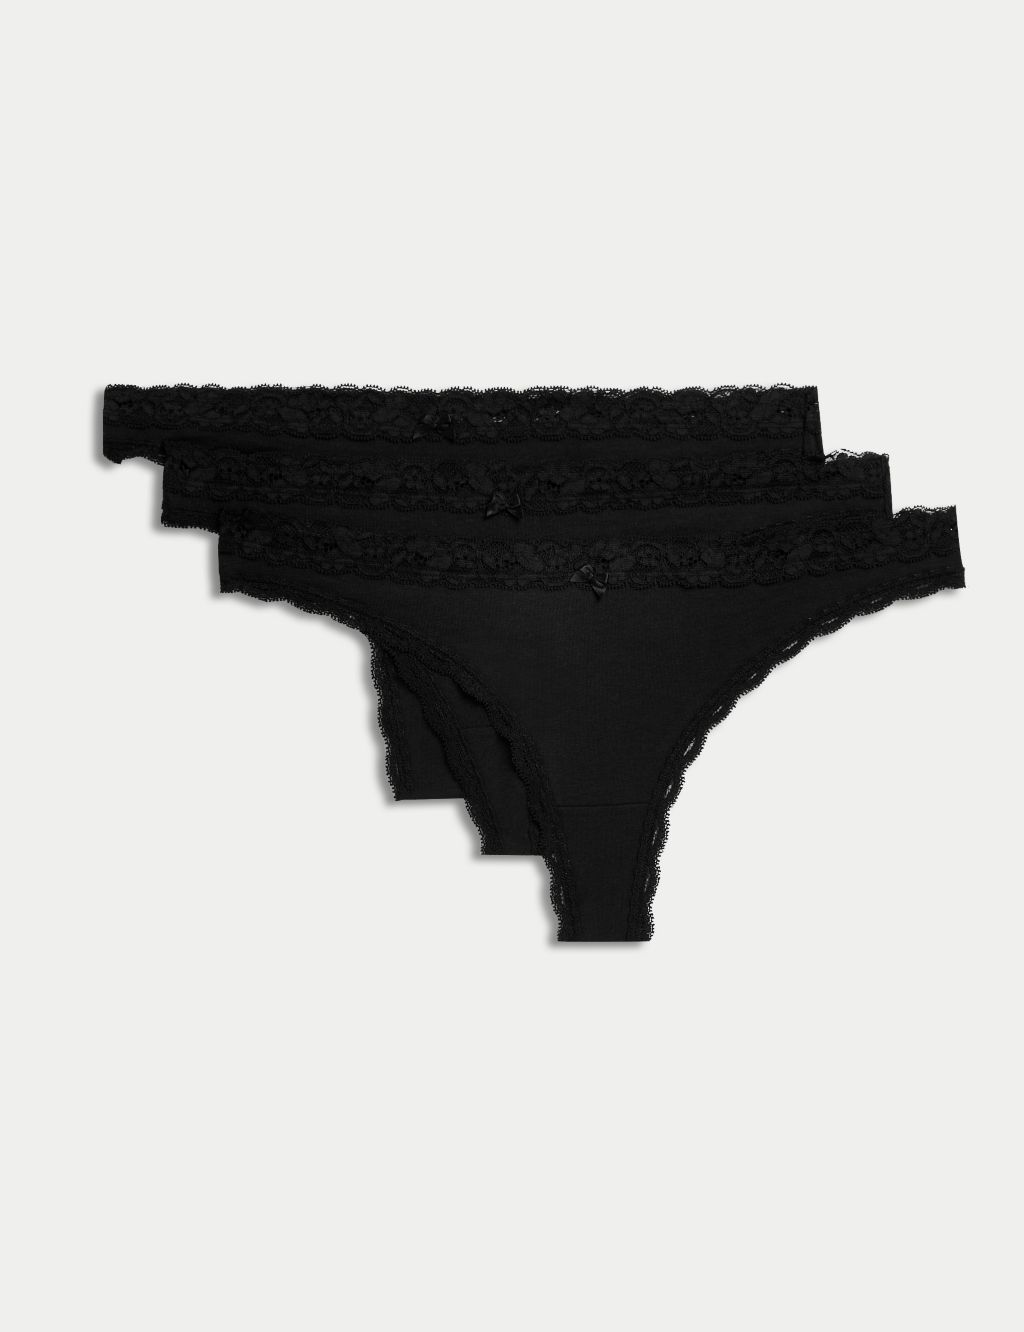 French Knickers High Waist Lace Black Panties Sexy Lingerie Plus Size 8-20  Frill